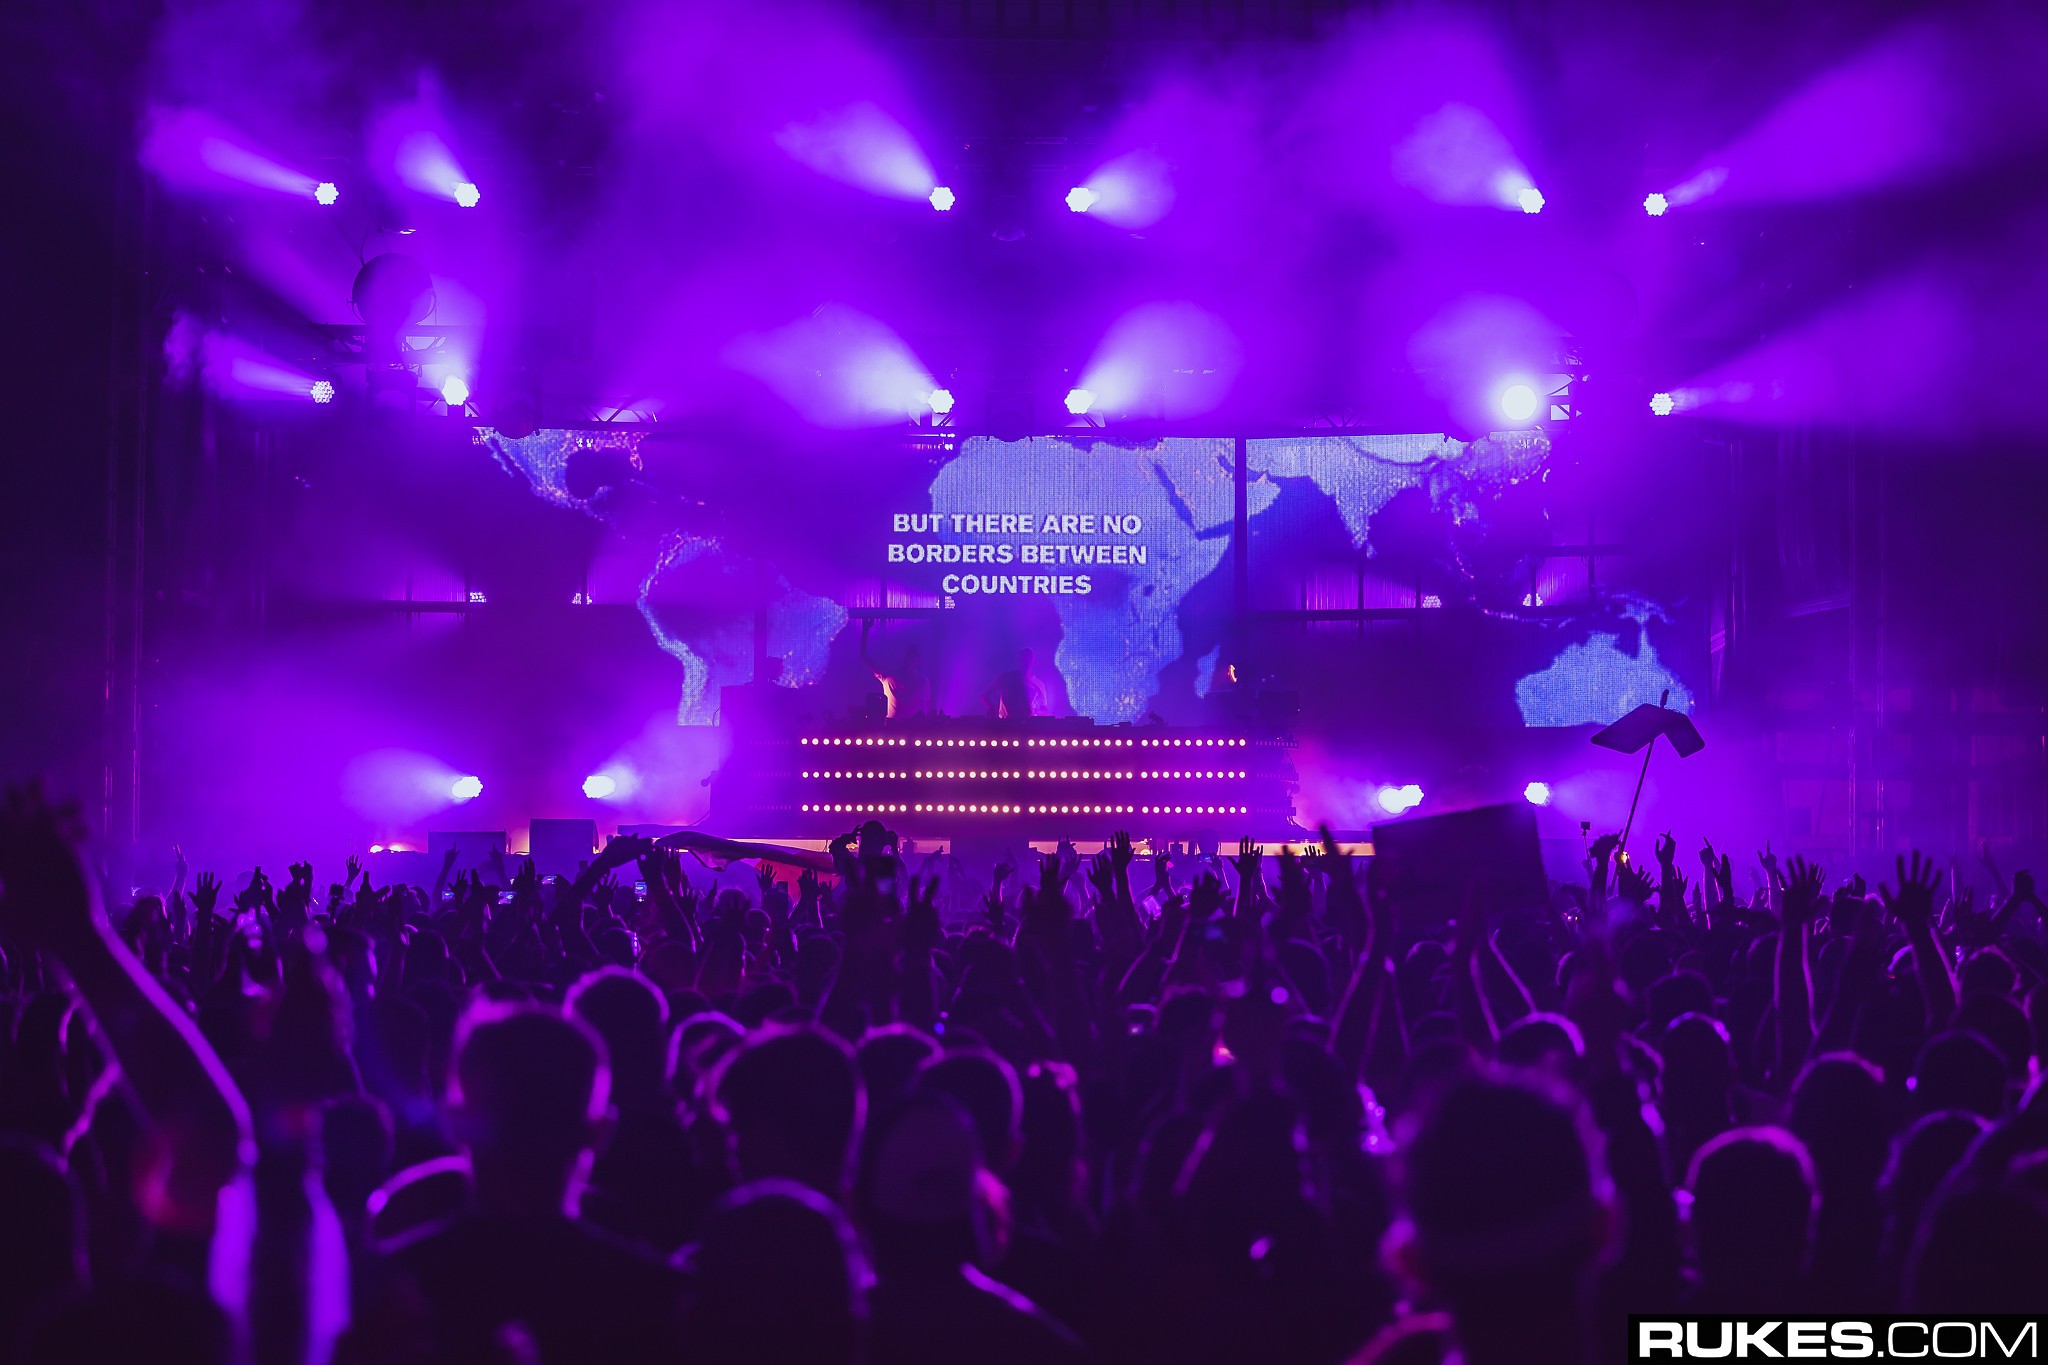 People 2048x1365 Rukes Above & Beyond stages quote DJ crowds